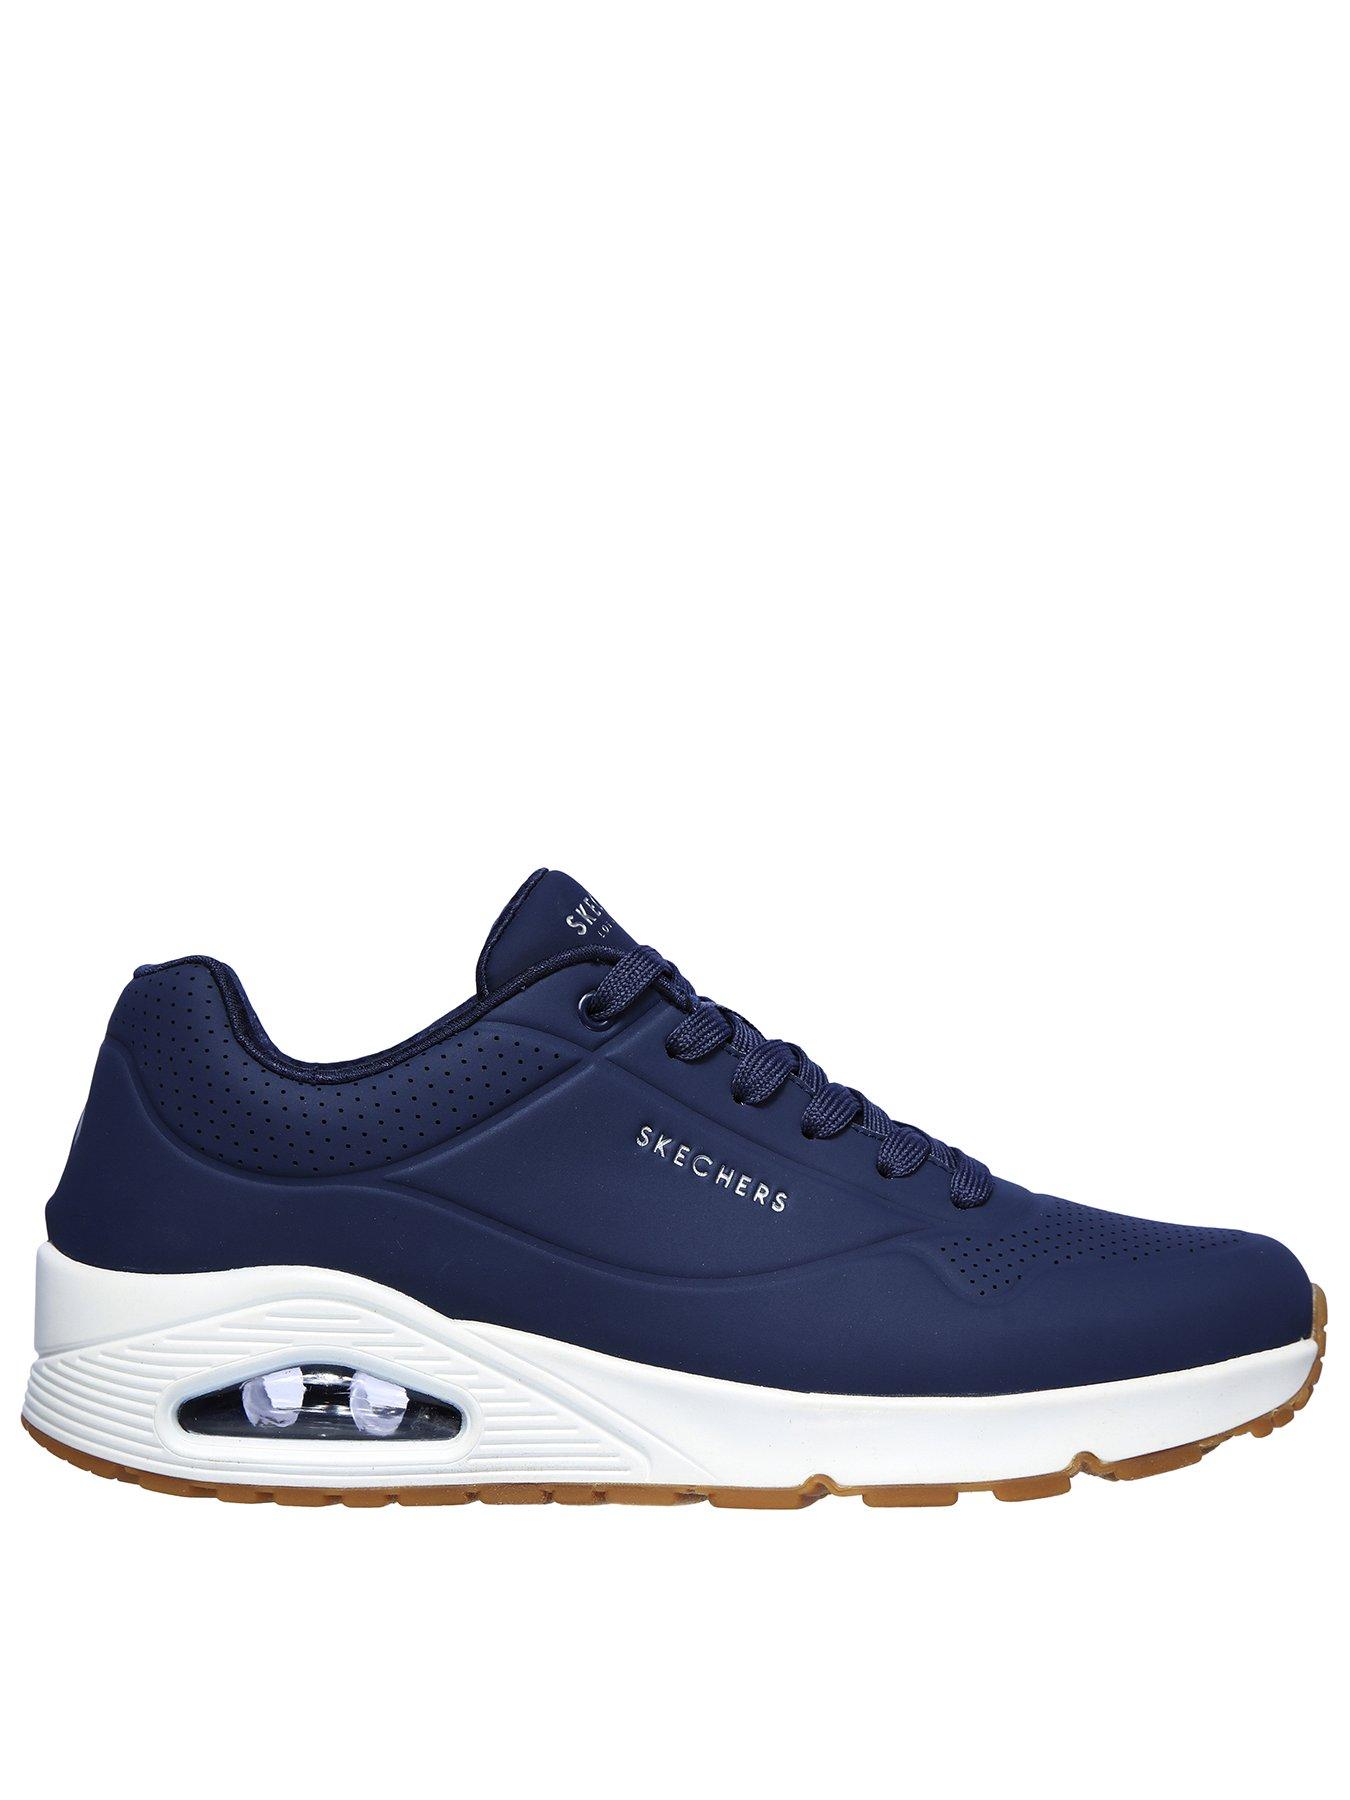 Skechers Uno Stand on Air Lace Up Trainers - Navy | very.co.uk